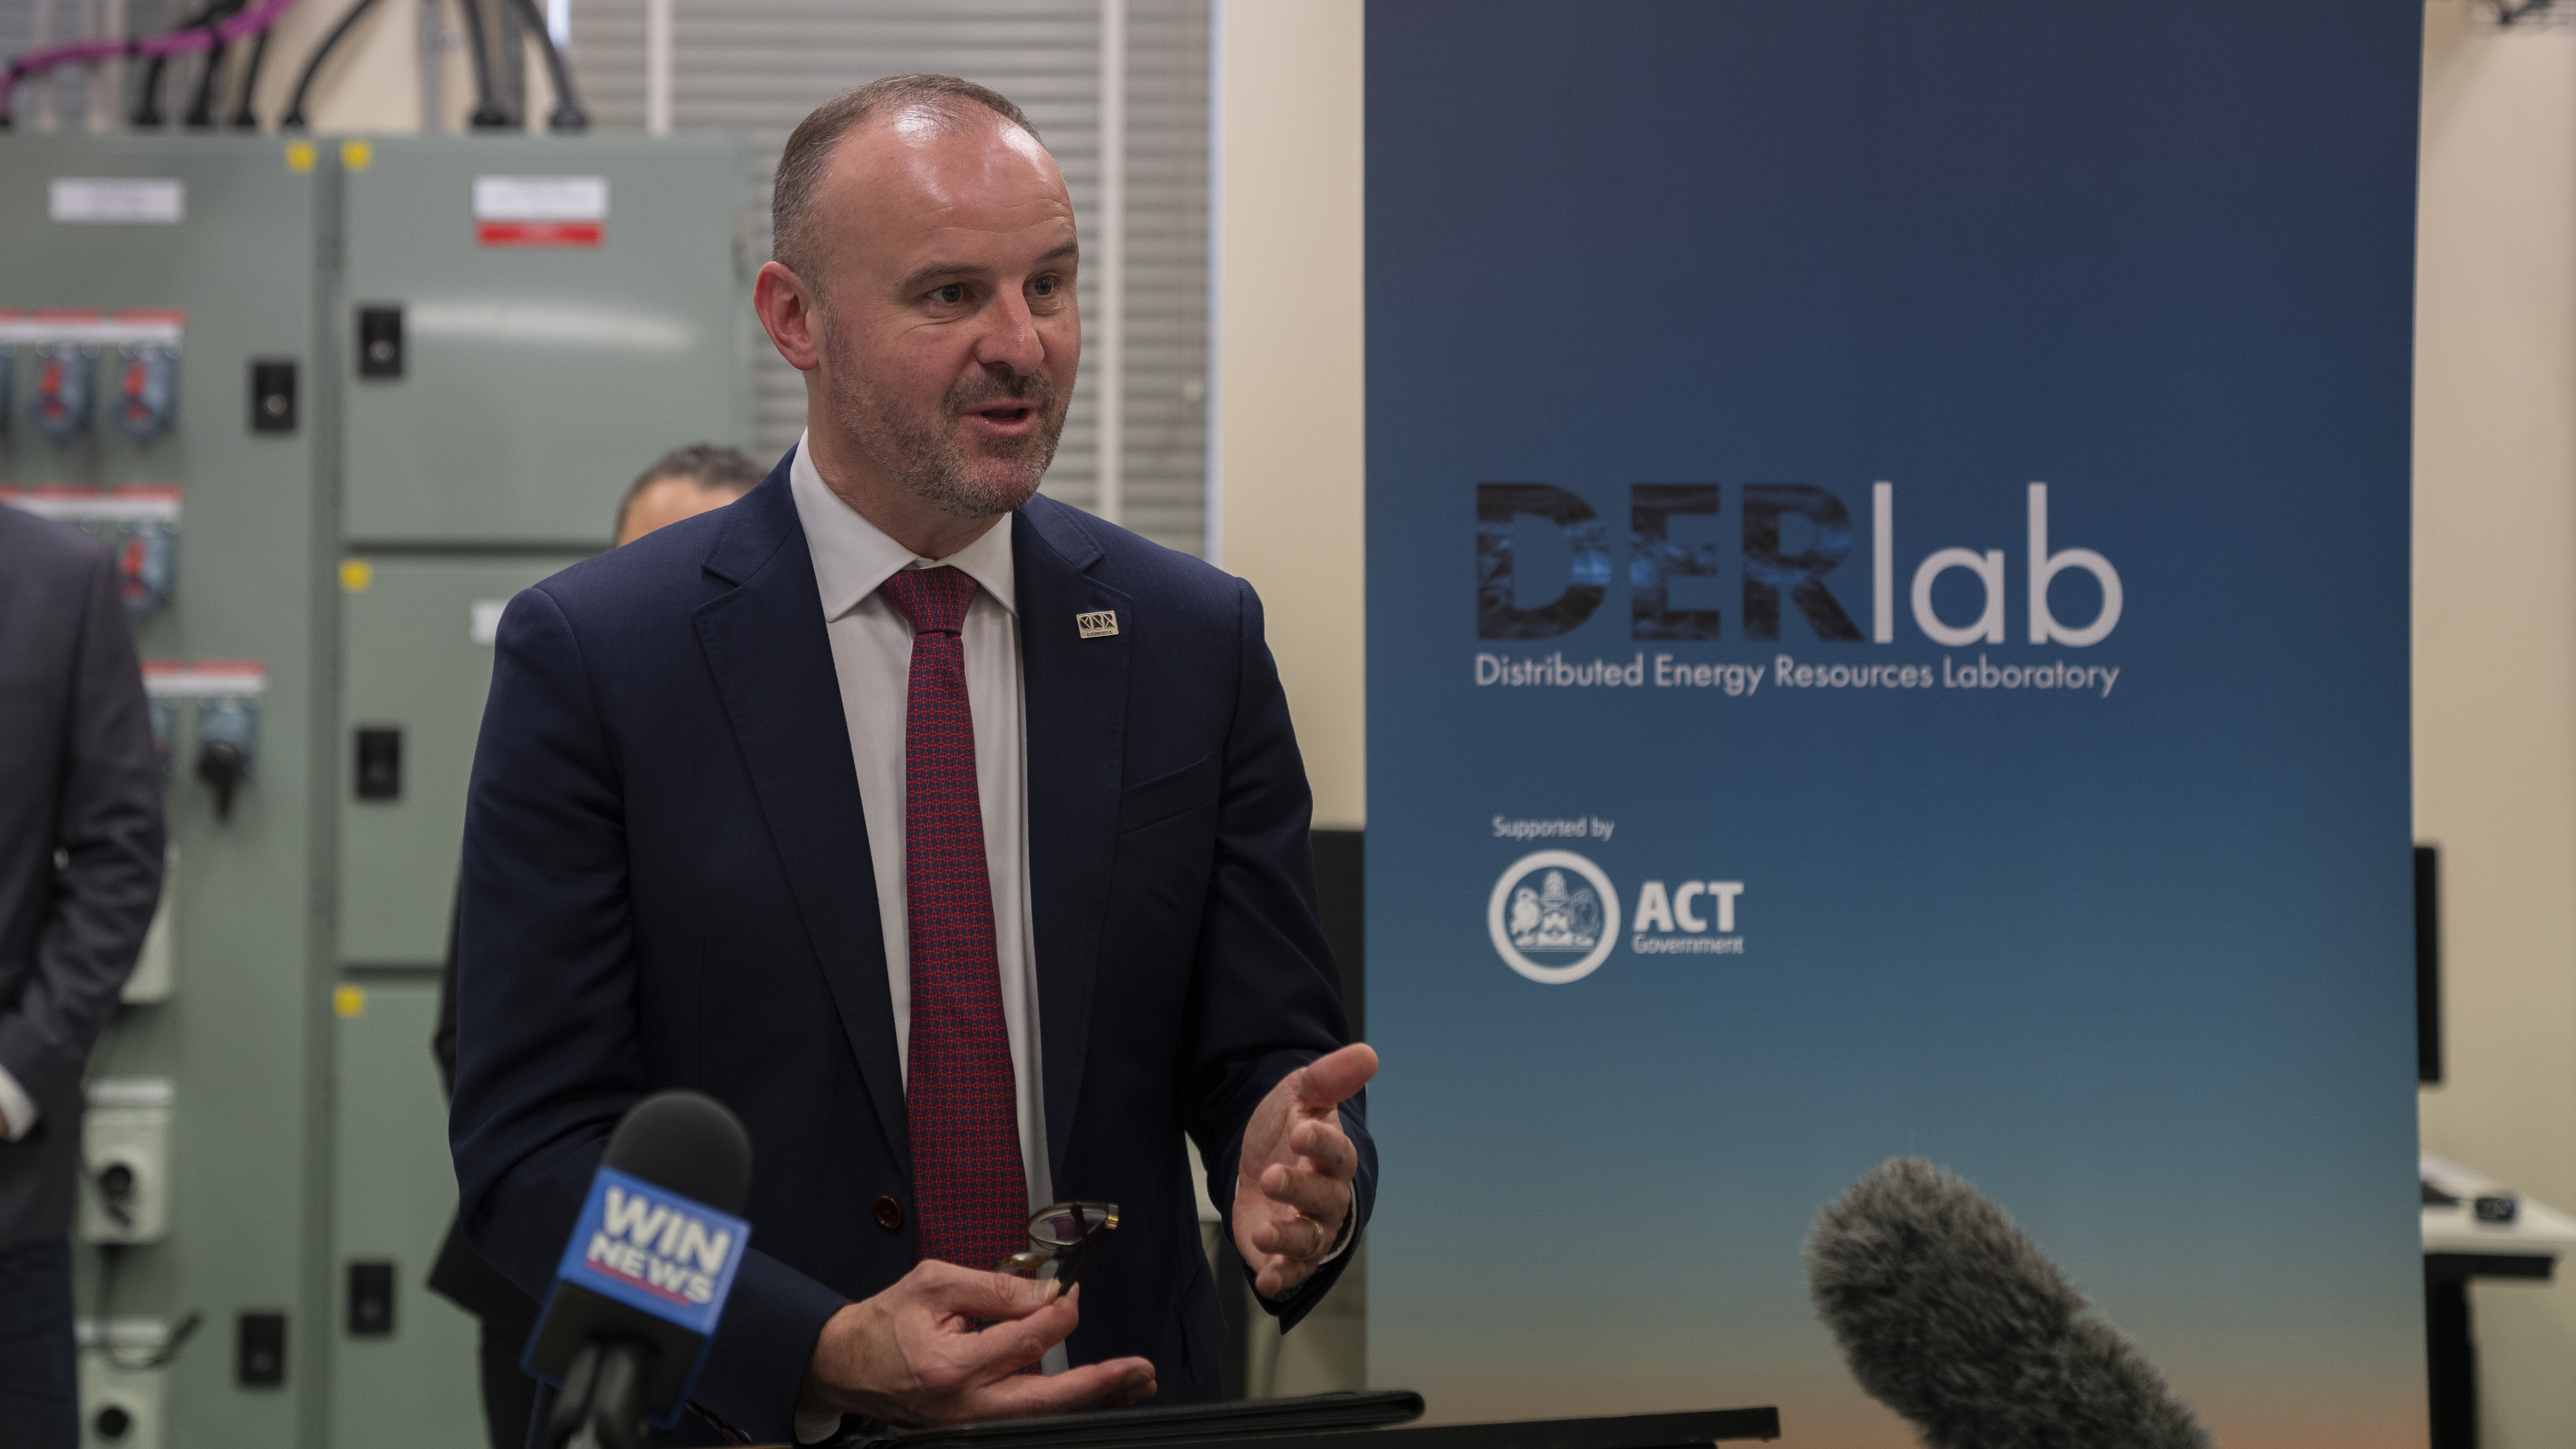 Chief Minister Andrew Barr stands in front of a &#039;DER Lab&#039; banner, and speaks at a lectern.